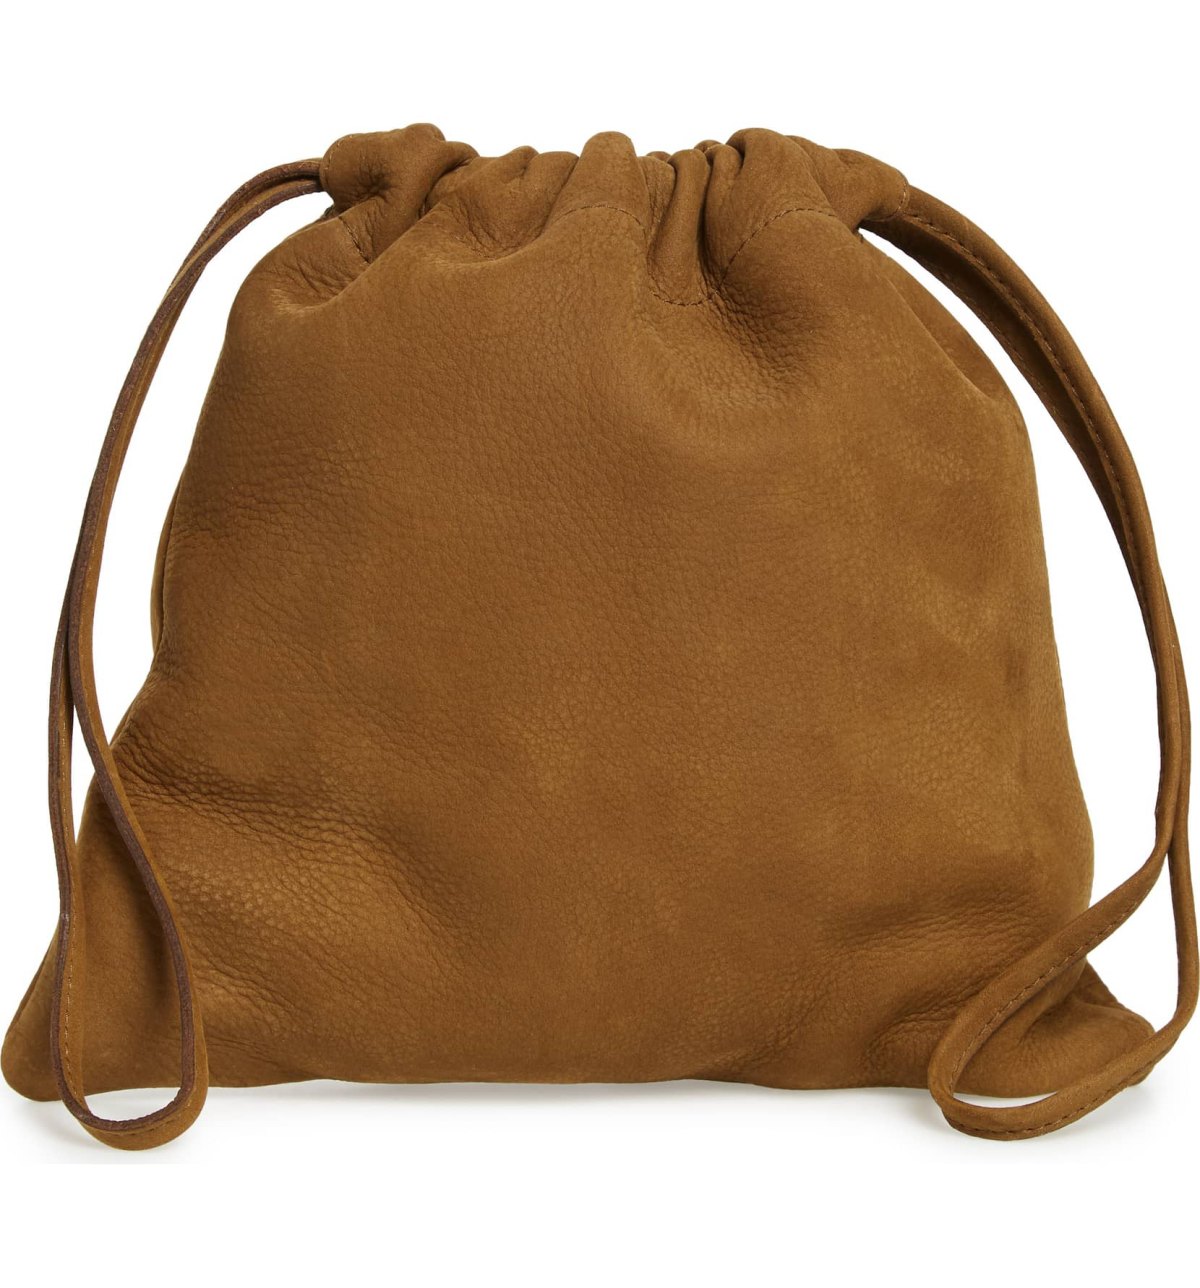 Check Out Our Favorite Two-in-One Madewell Shoulder Bag